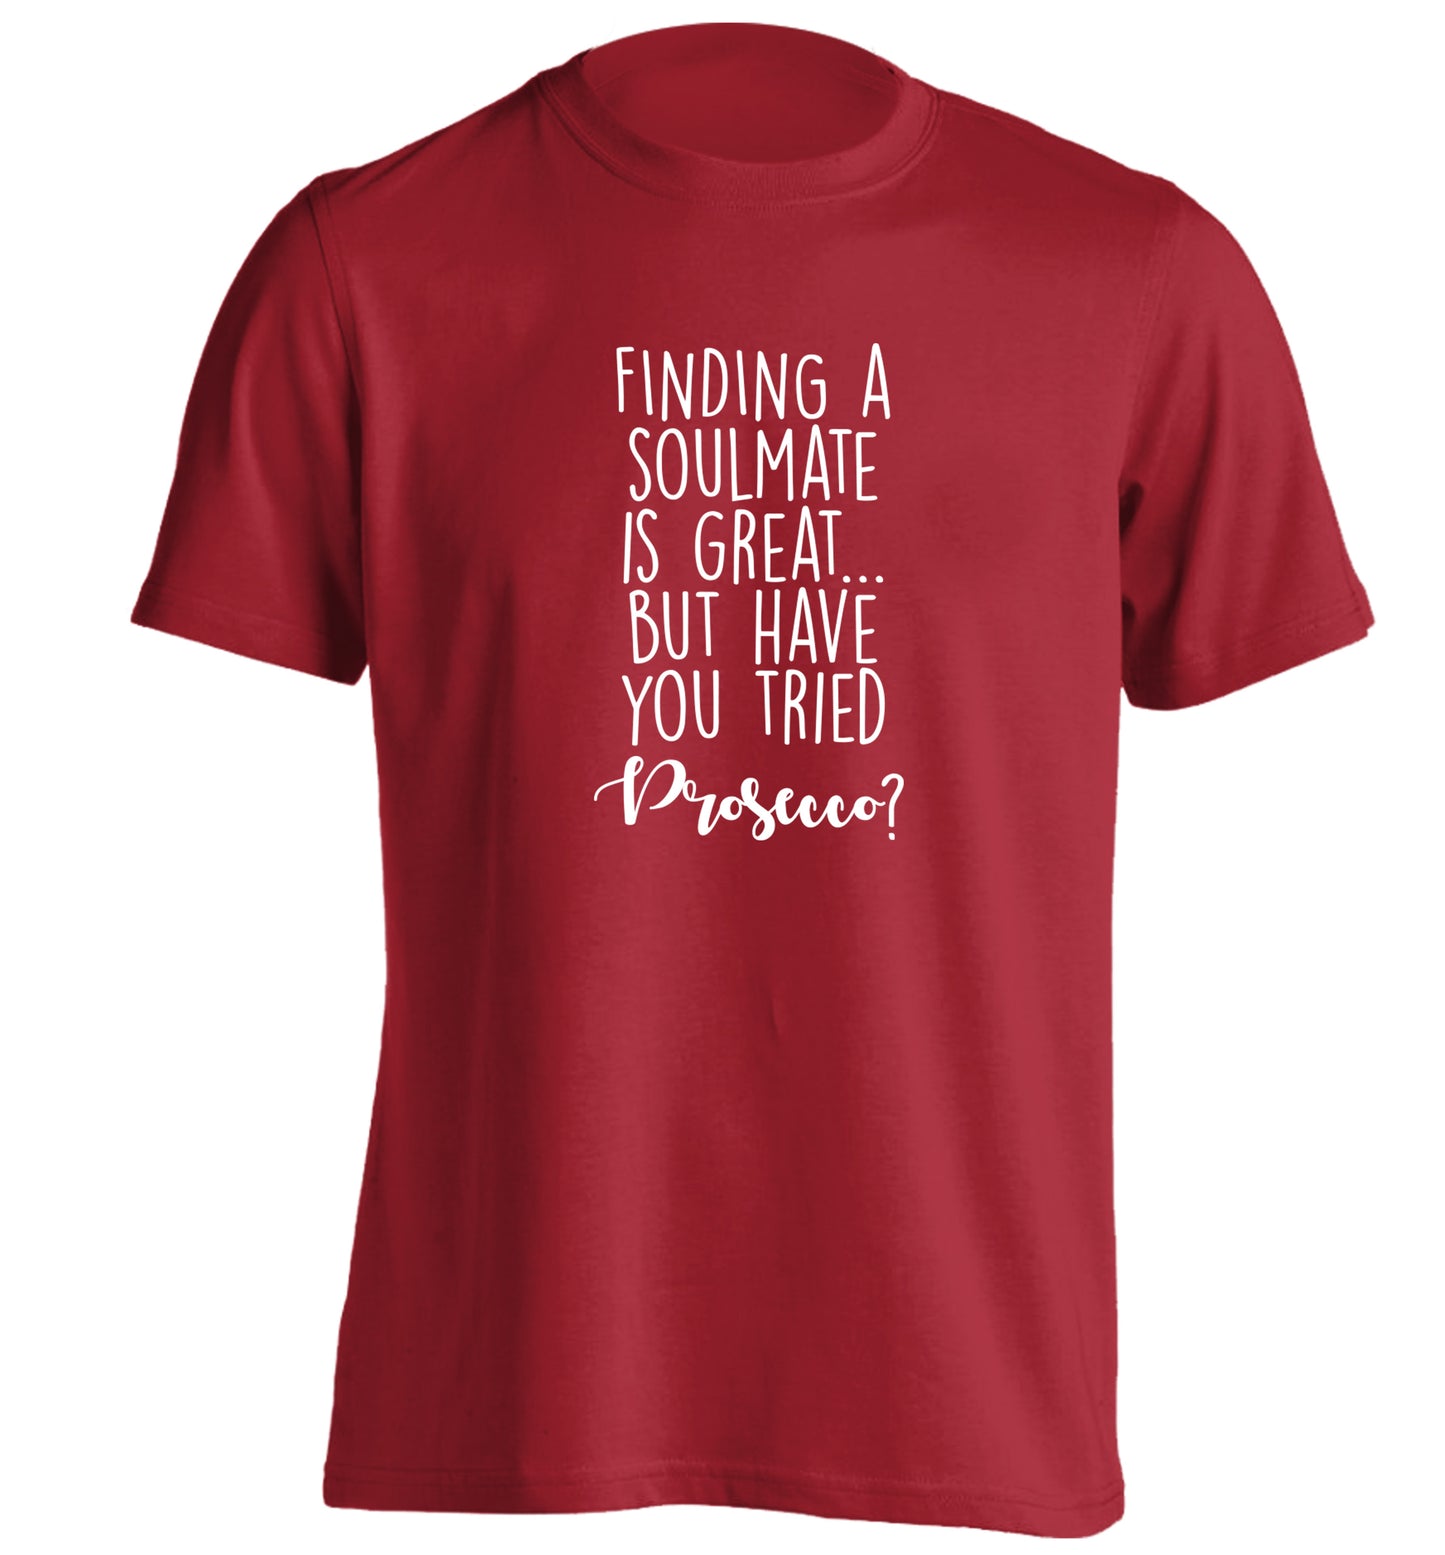 Finding a soulmate is great but have you tried prosecco? adults unisex red Tshirt 2XL